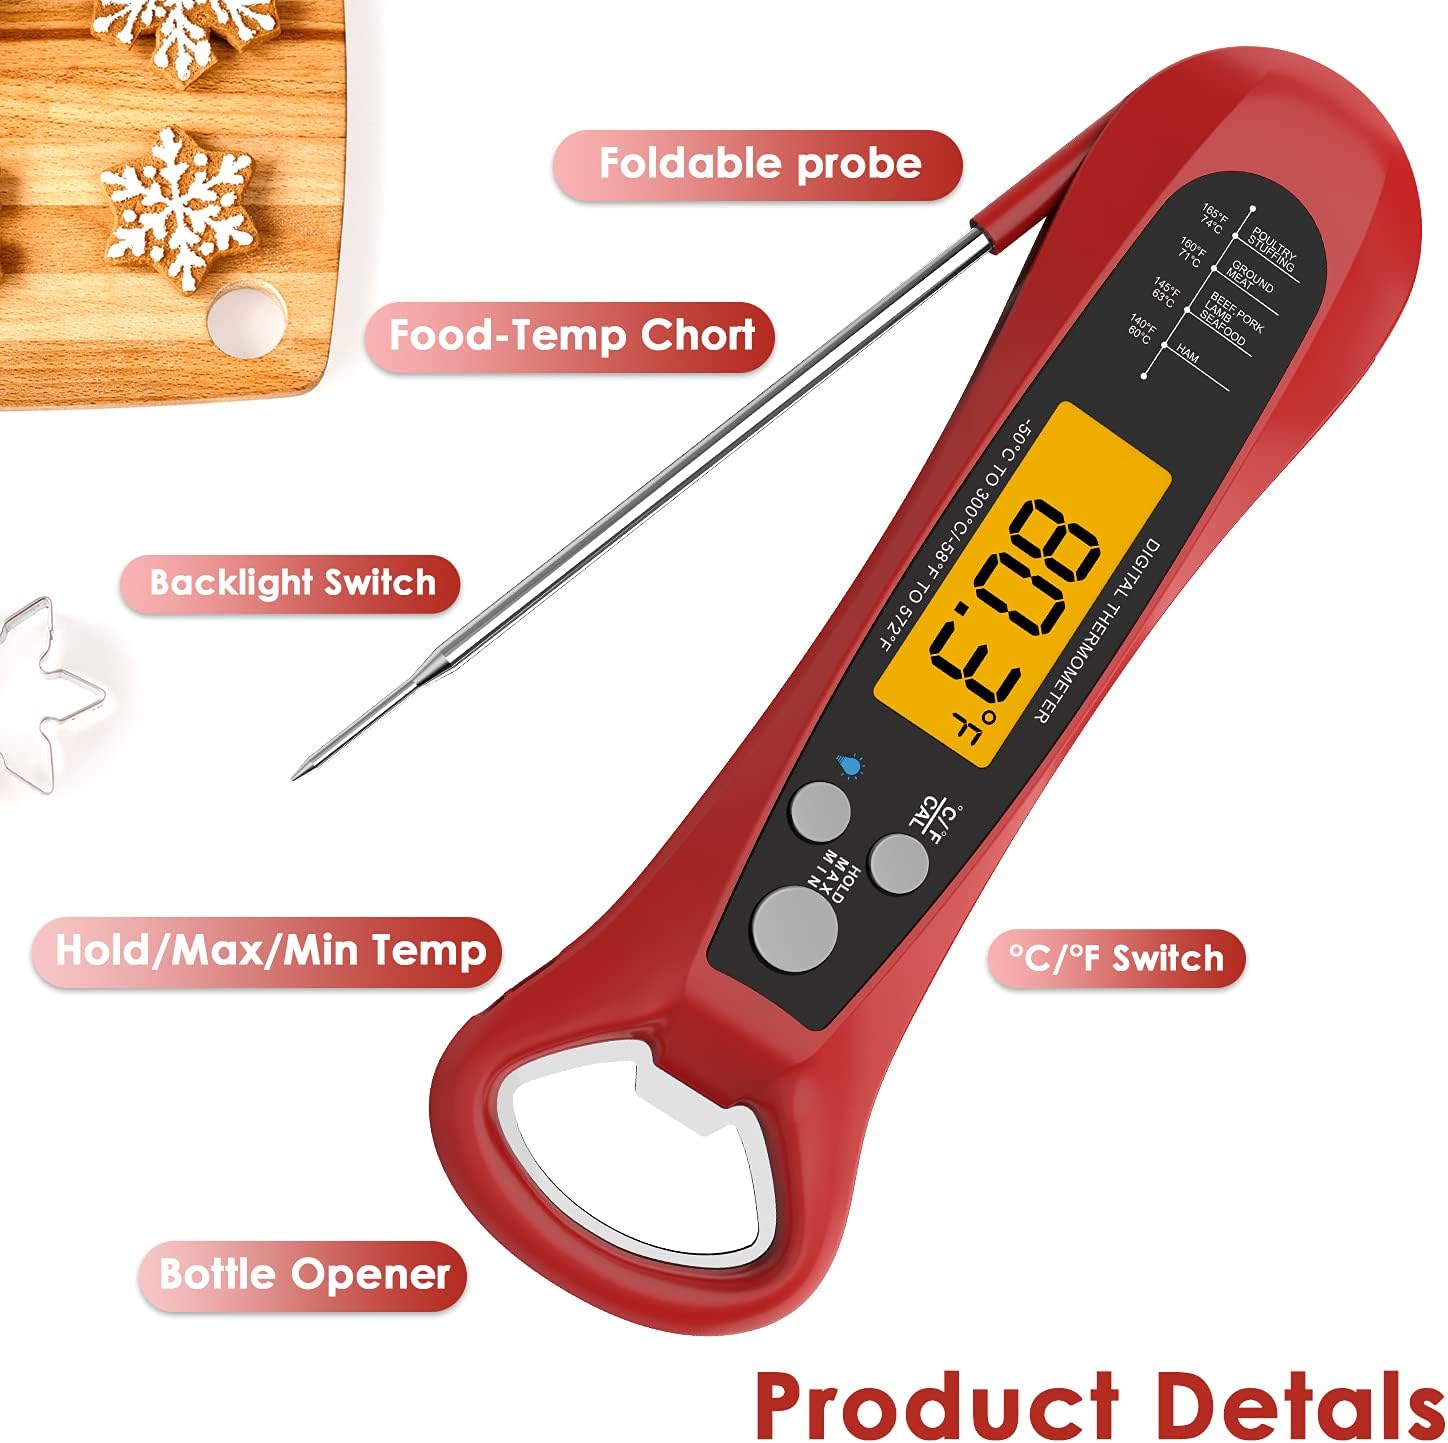 Instant Read Meat Thermometer for Cooking, Fast  Precise Digital Food Thermometer with Backlight, Magnet, Calibration, Foldable Probe, Waterproof Grill Thermometer for Deep Fry, BBQ, Roast Turkey